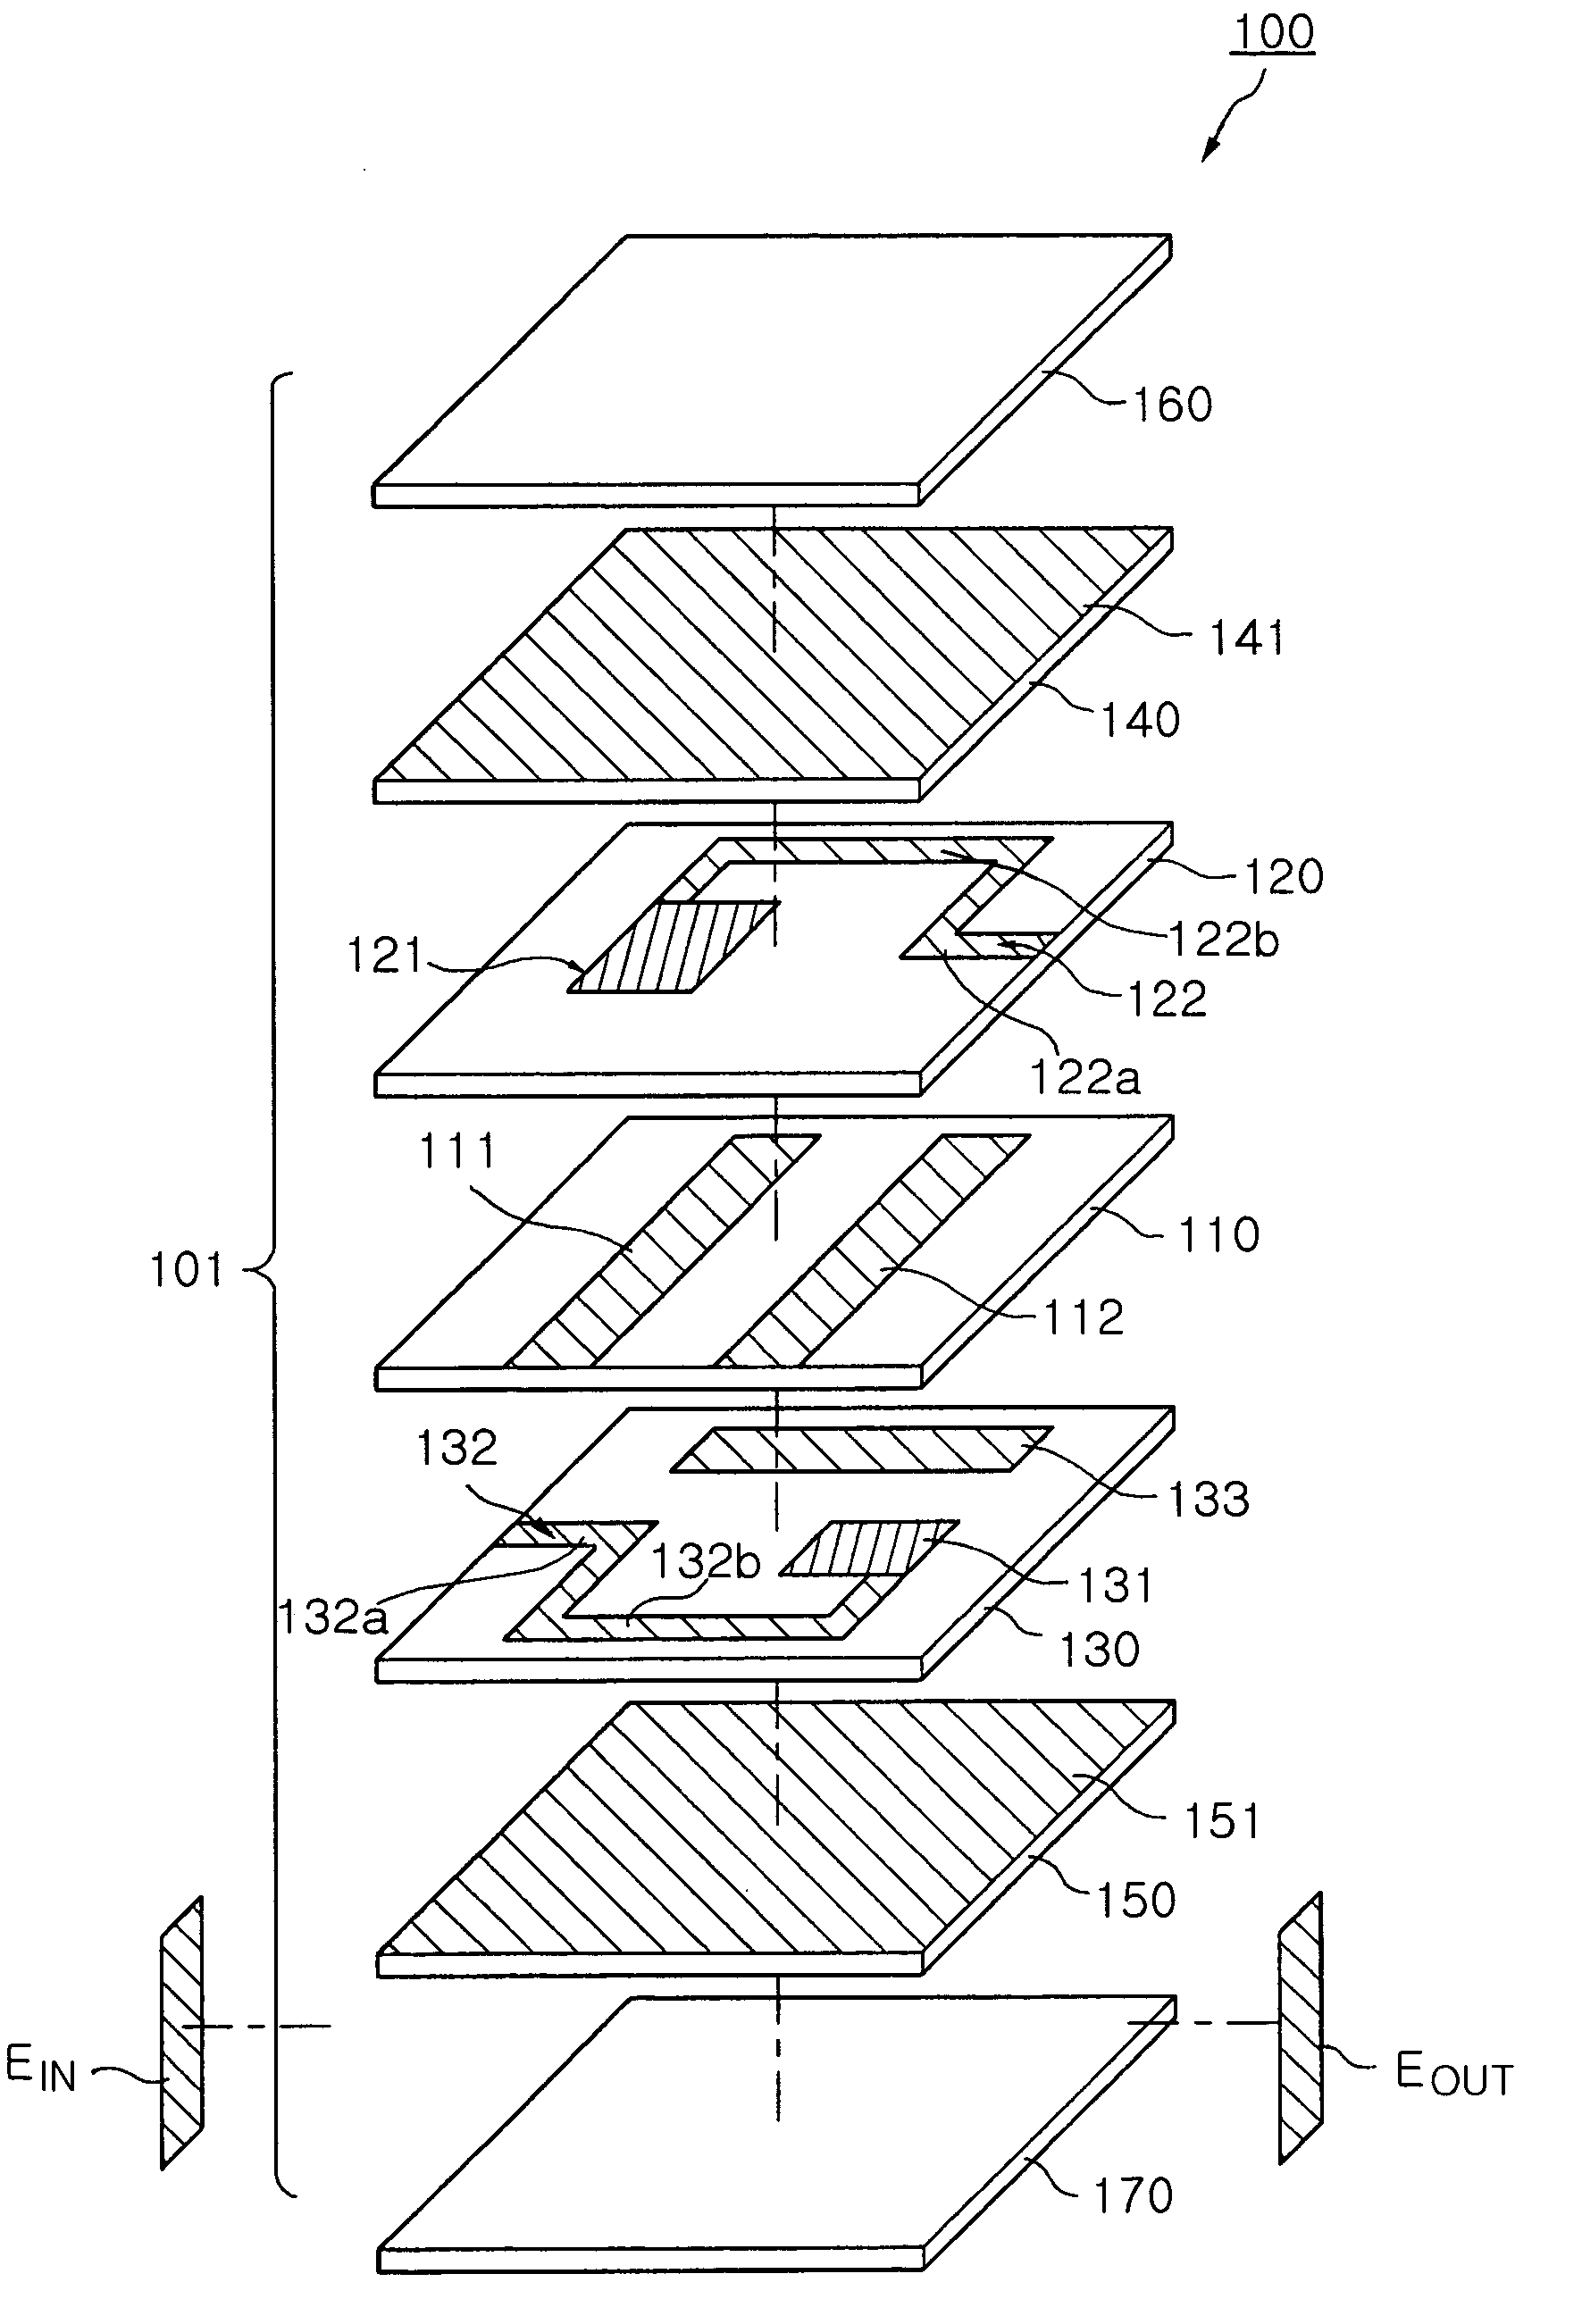 Laminated filter with improved stop band attenuation